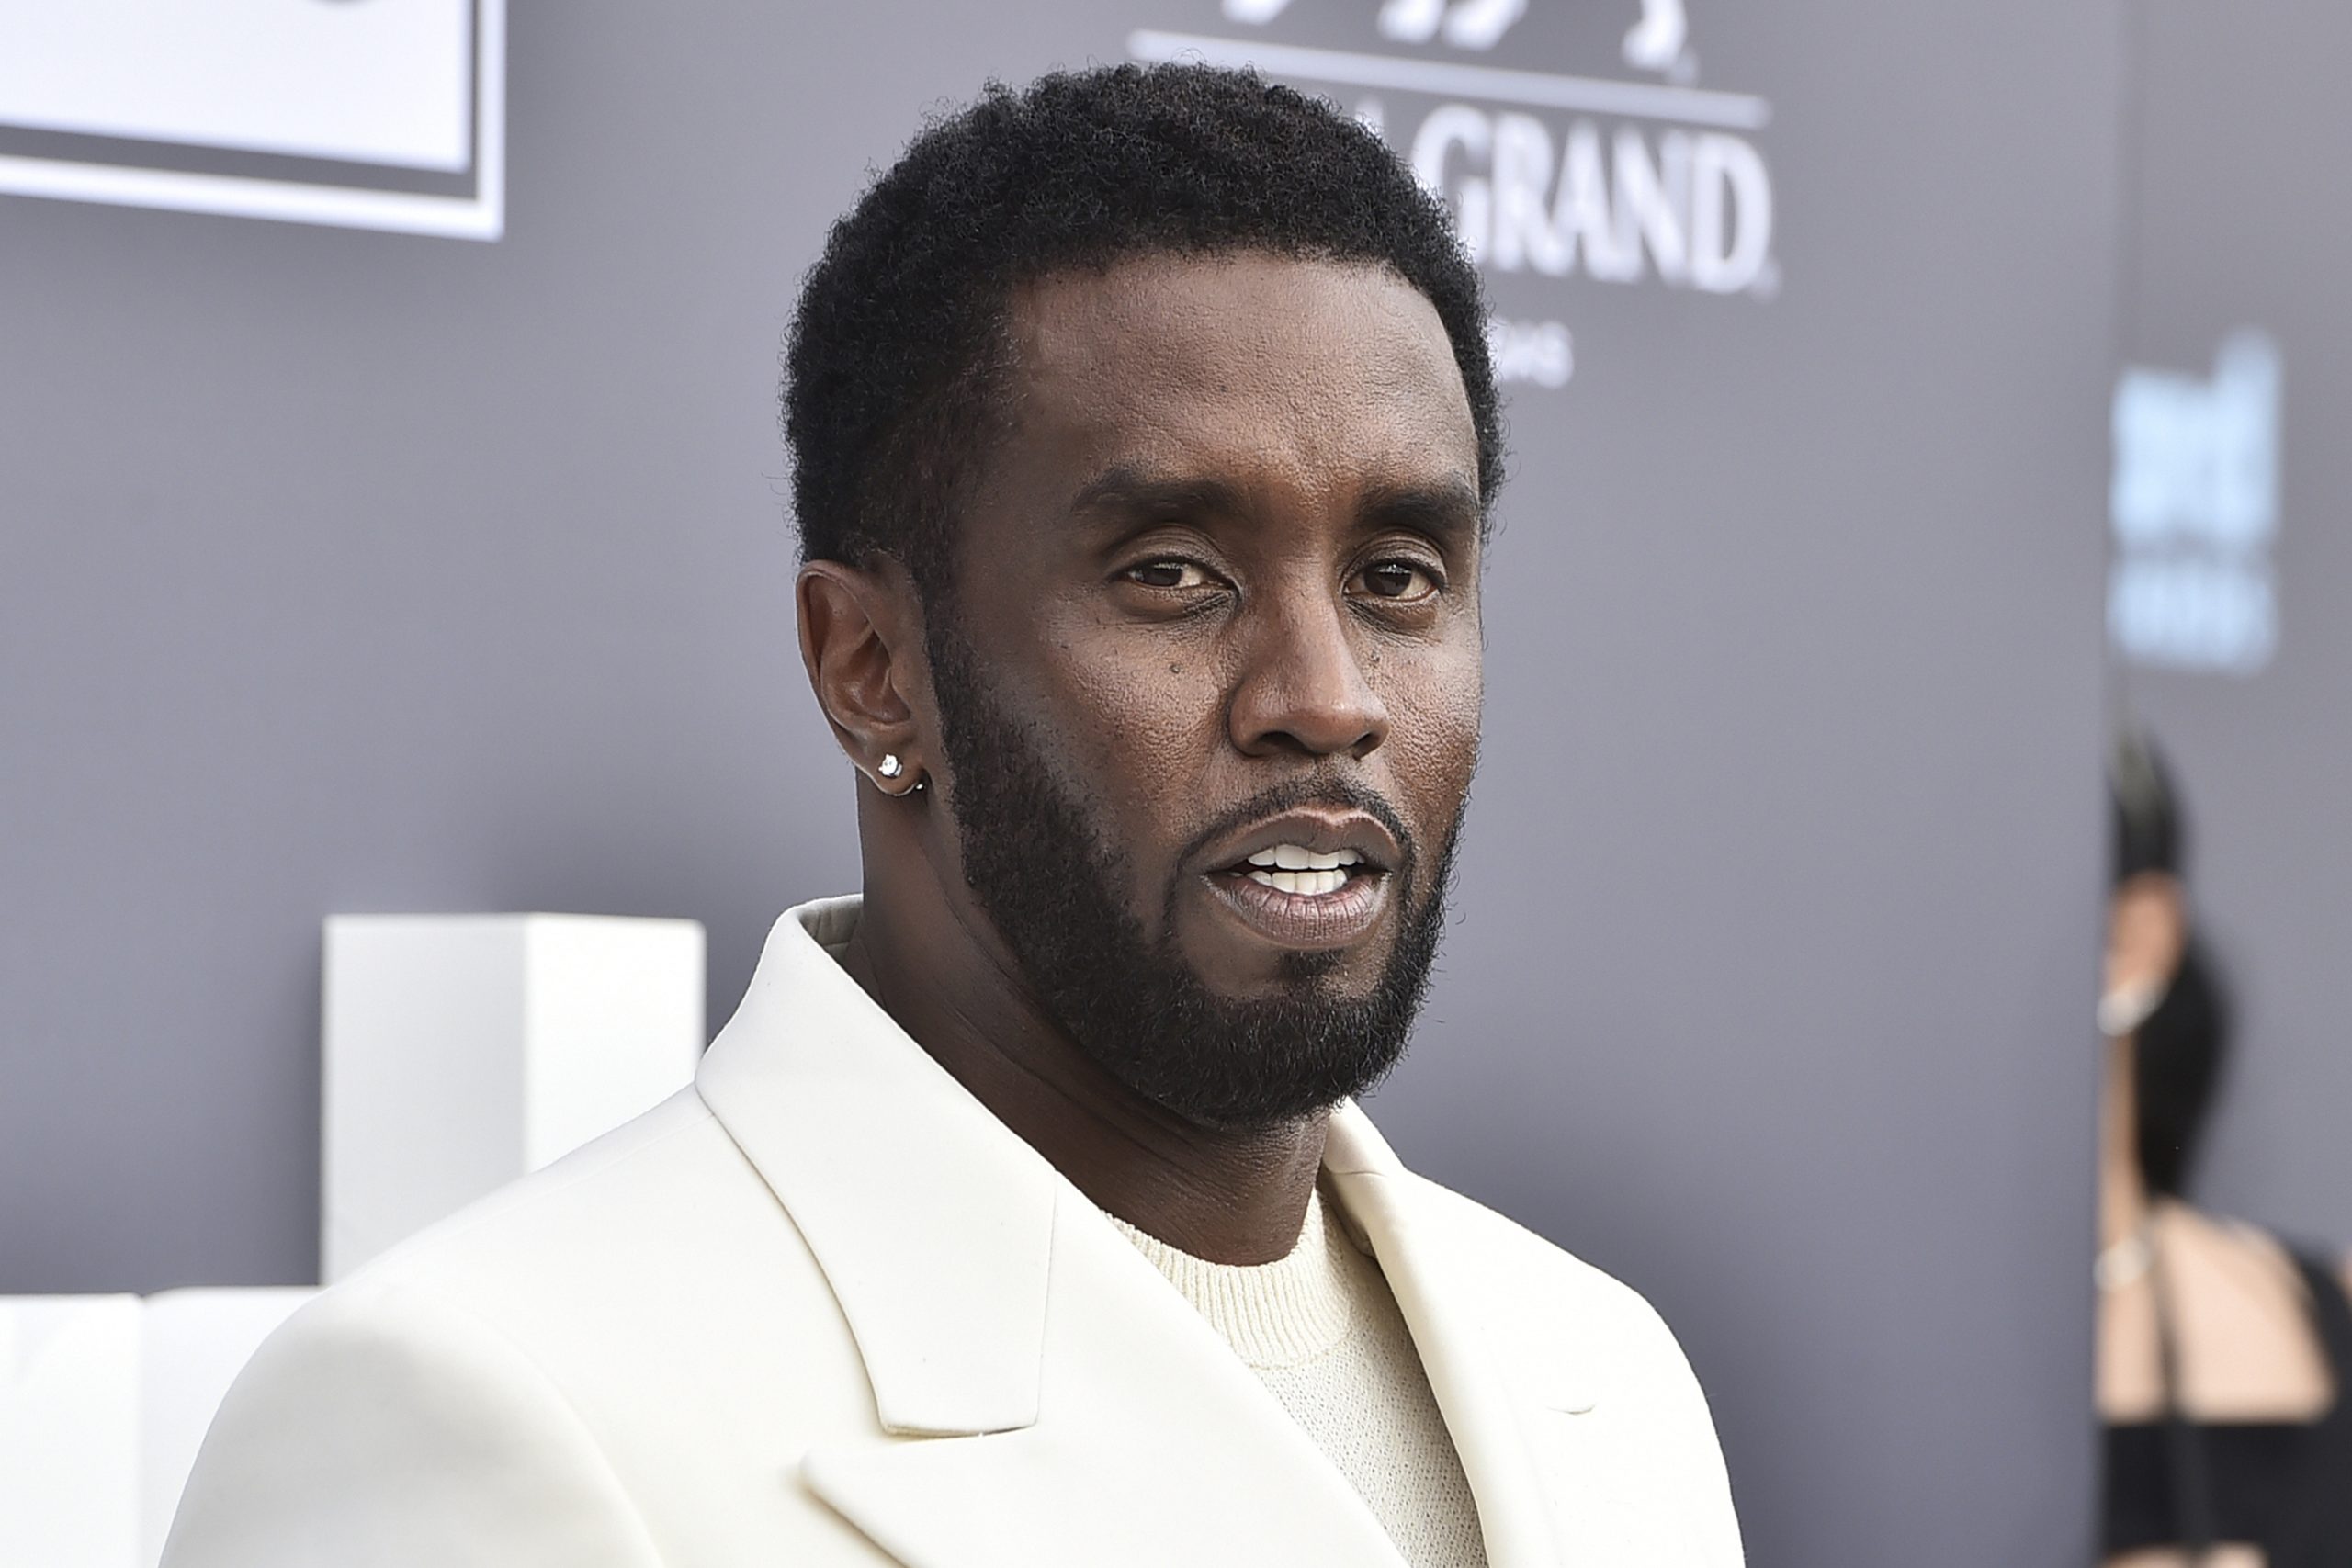 Diddy files legal motion to dismiss lawsuit from woman who alleged he s3xually assaulted her in 1991